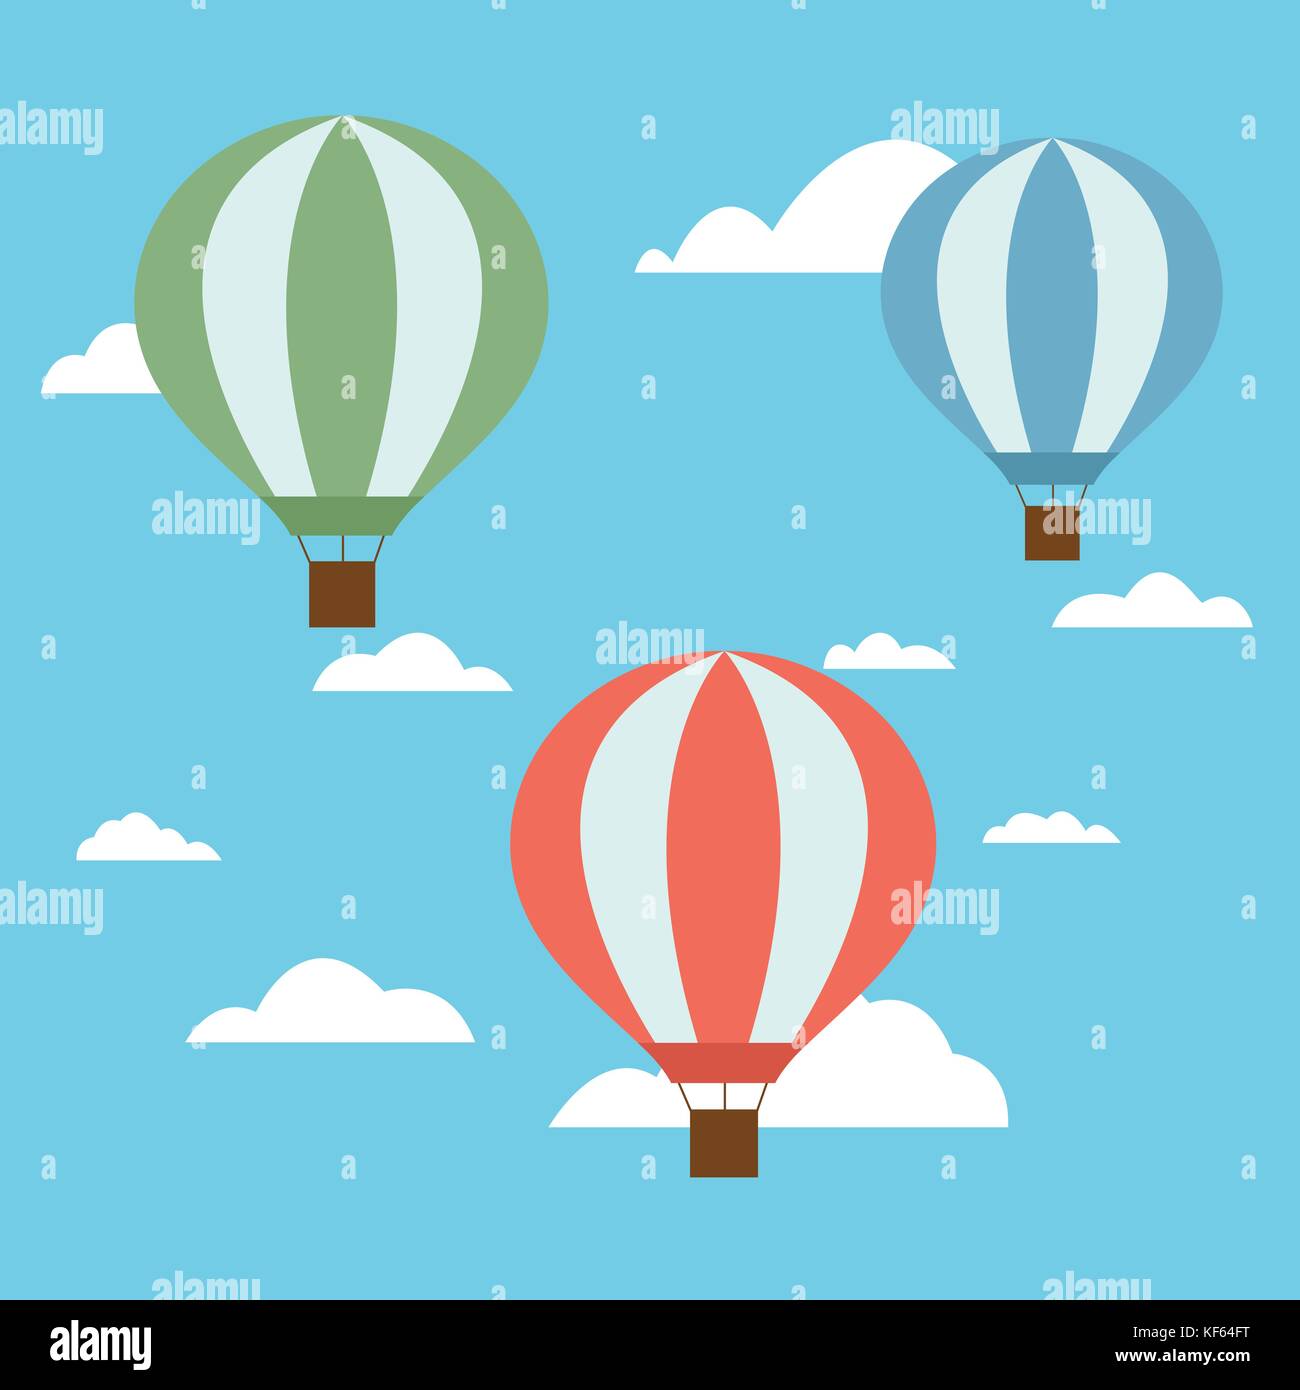 Set of three colorful hot air balloons of red green and blue colors with a basket and ropes flying high after a bright blue sky with white clouds - Ve Stock Vector